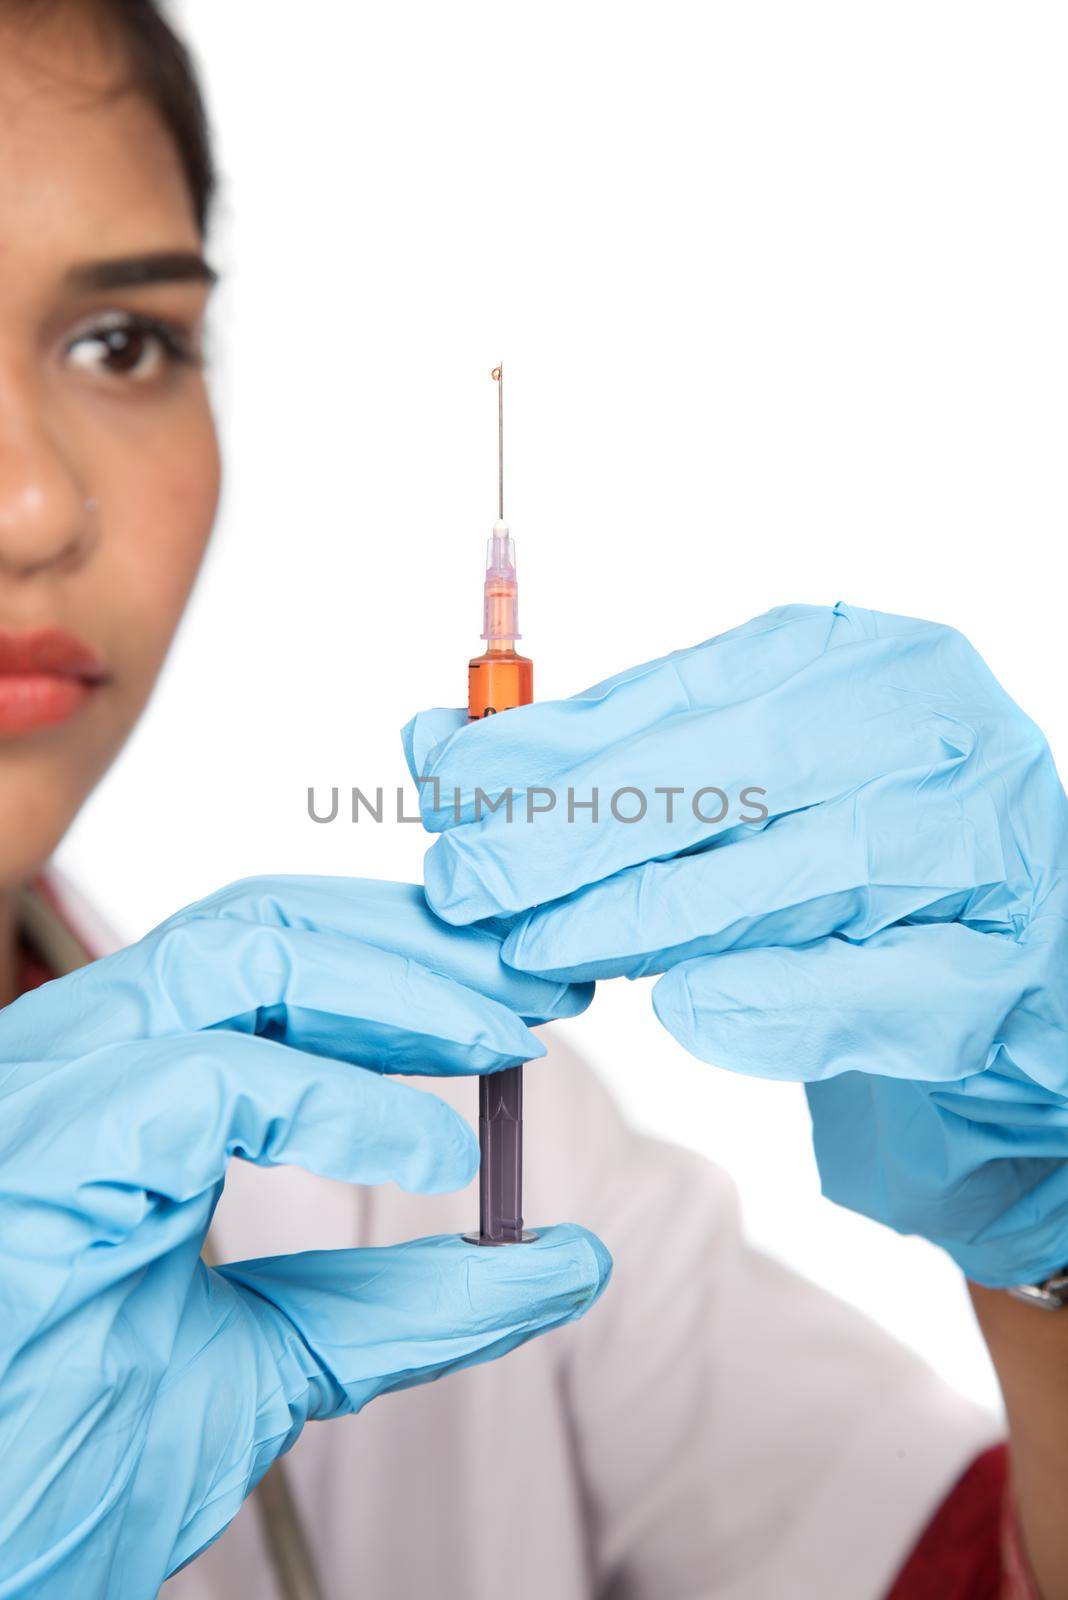 A female doctor with a stethoscope is holding an Injection or Syringe. by DipakShelare